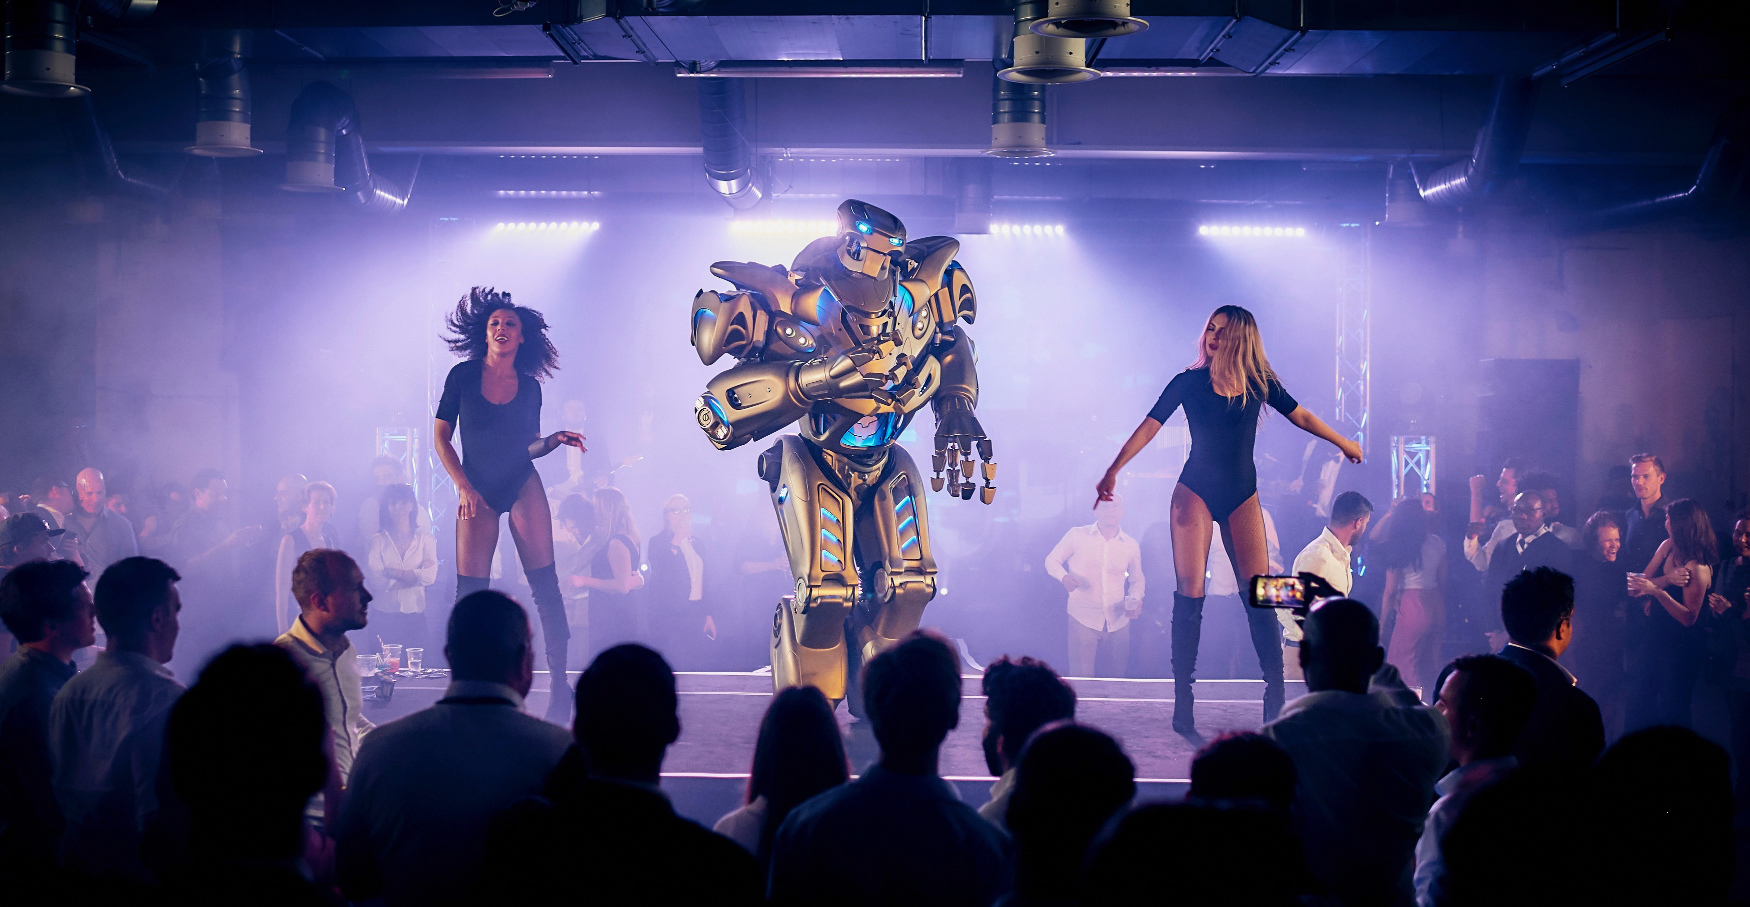 Titan the Robot on stage at a corporate event at the Oval Cricket Ground, London.